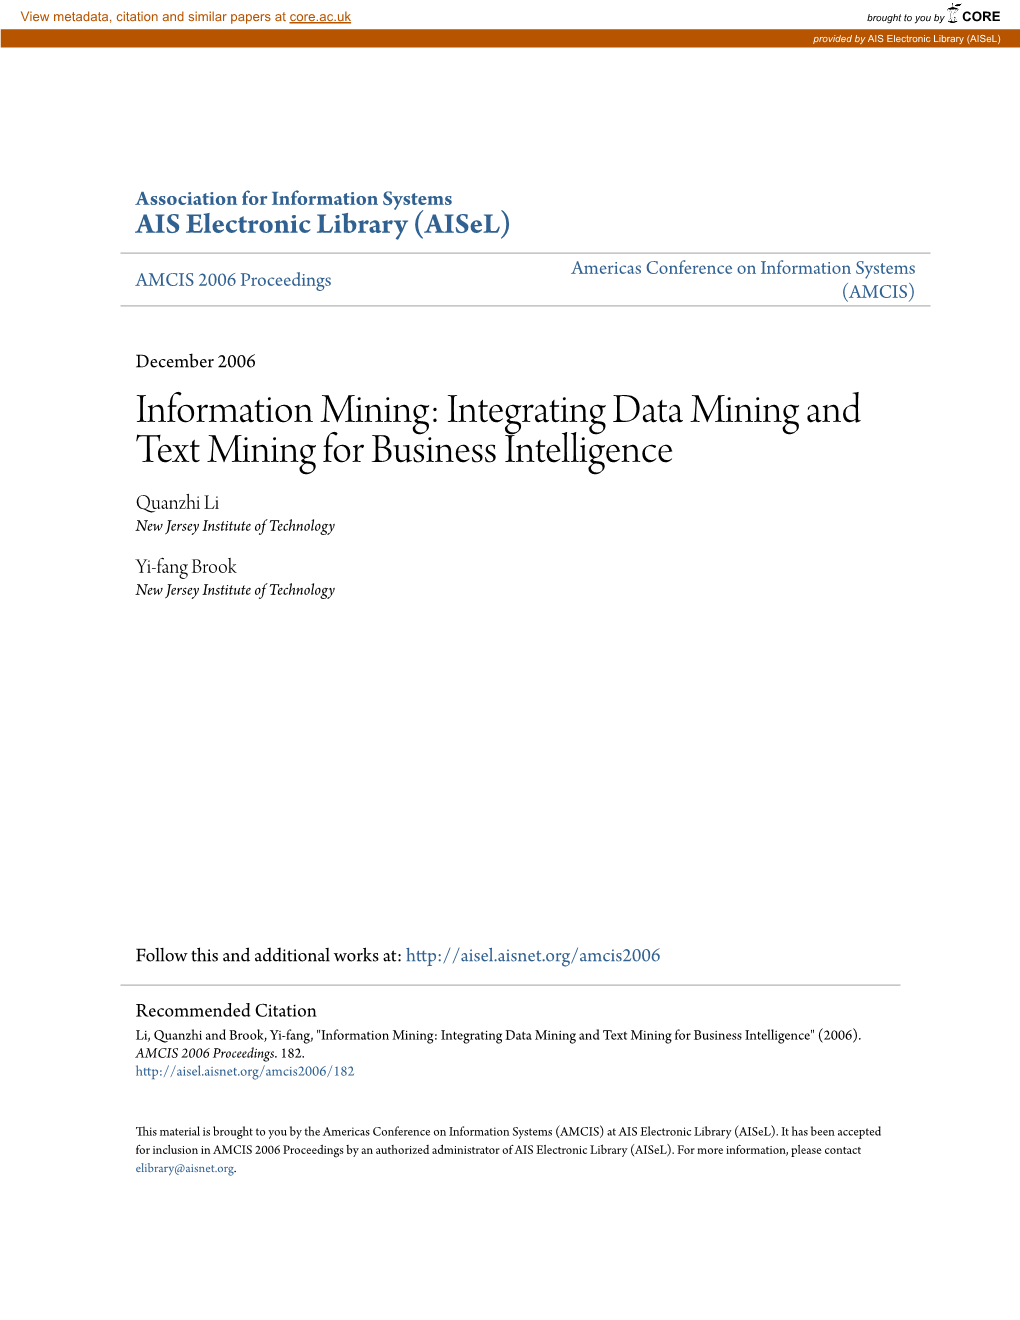 Information Mining: Integrating Data Mining and Text Mining for Business Intelligence Quanzhi Li New Jersey Institute of Technology